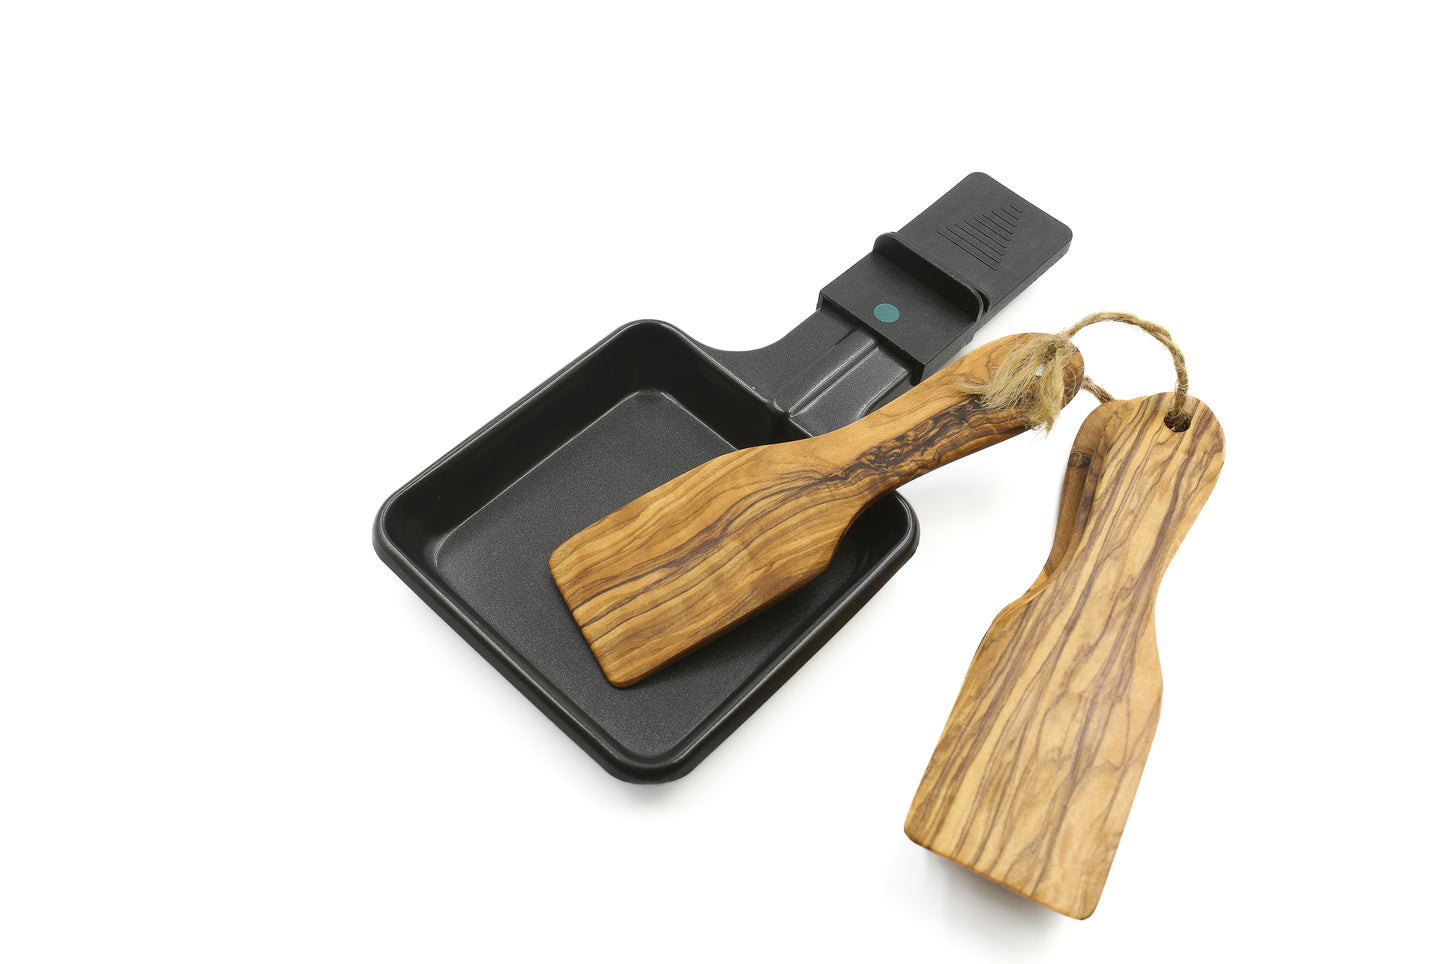 Raclette spatula set made from exquisite olive wood, includes 6 pieces